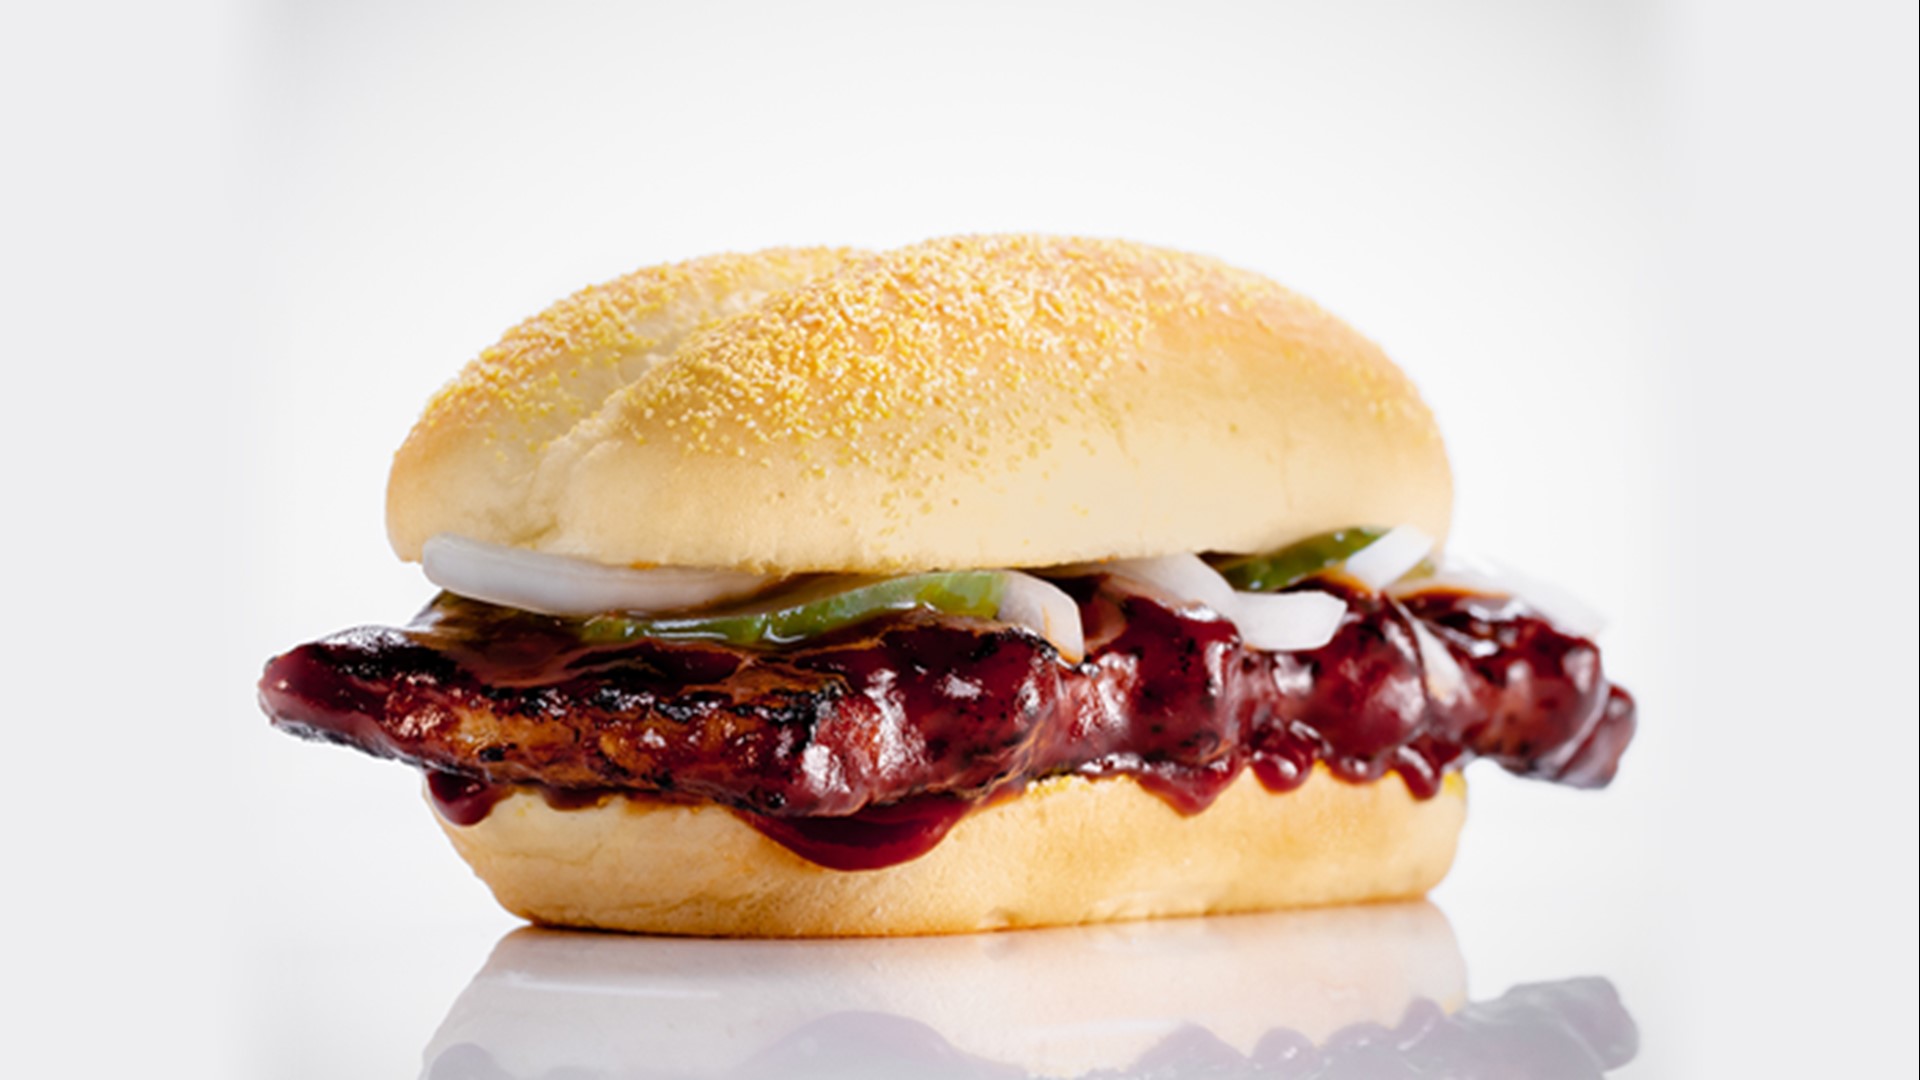 The McRib is back! But what exactly is it made of?